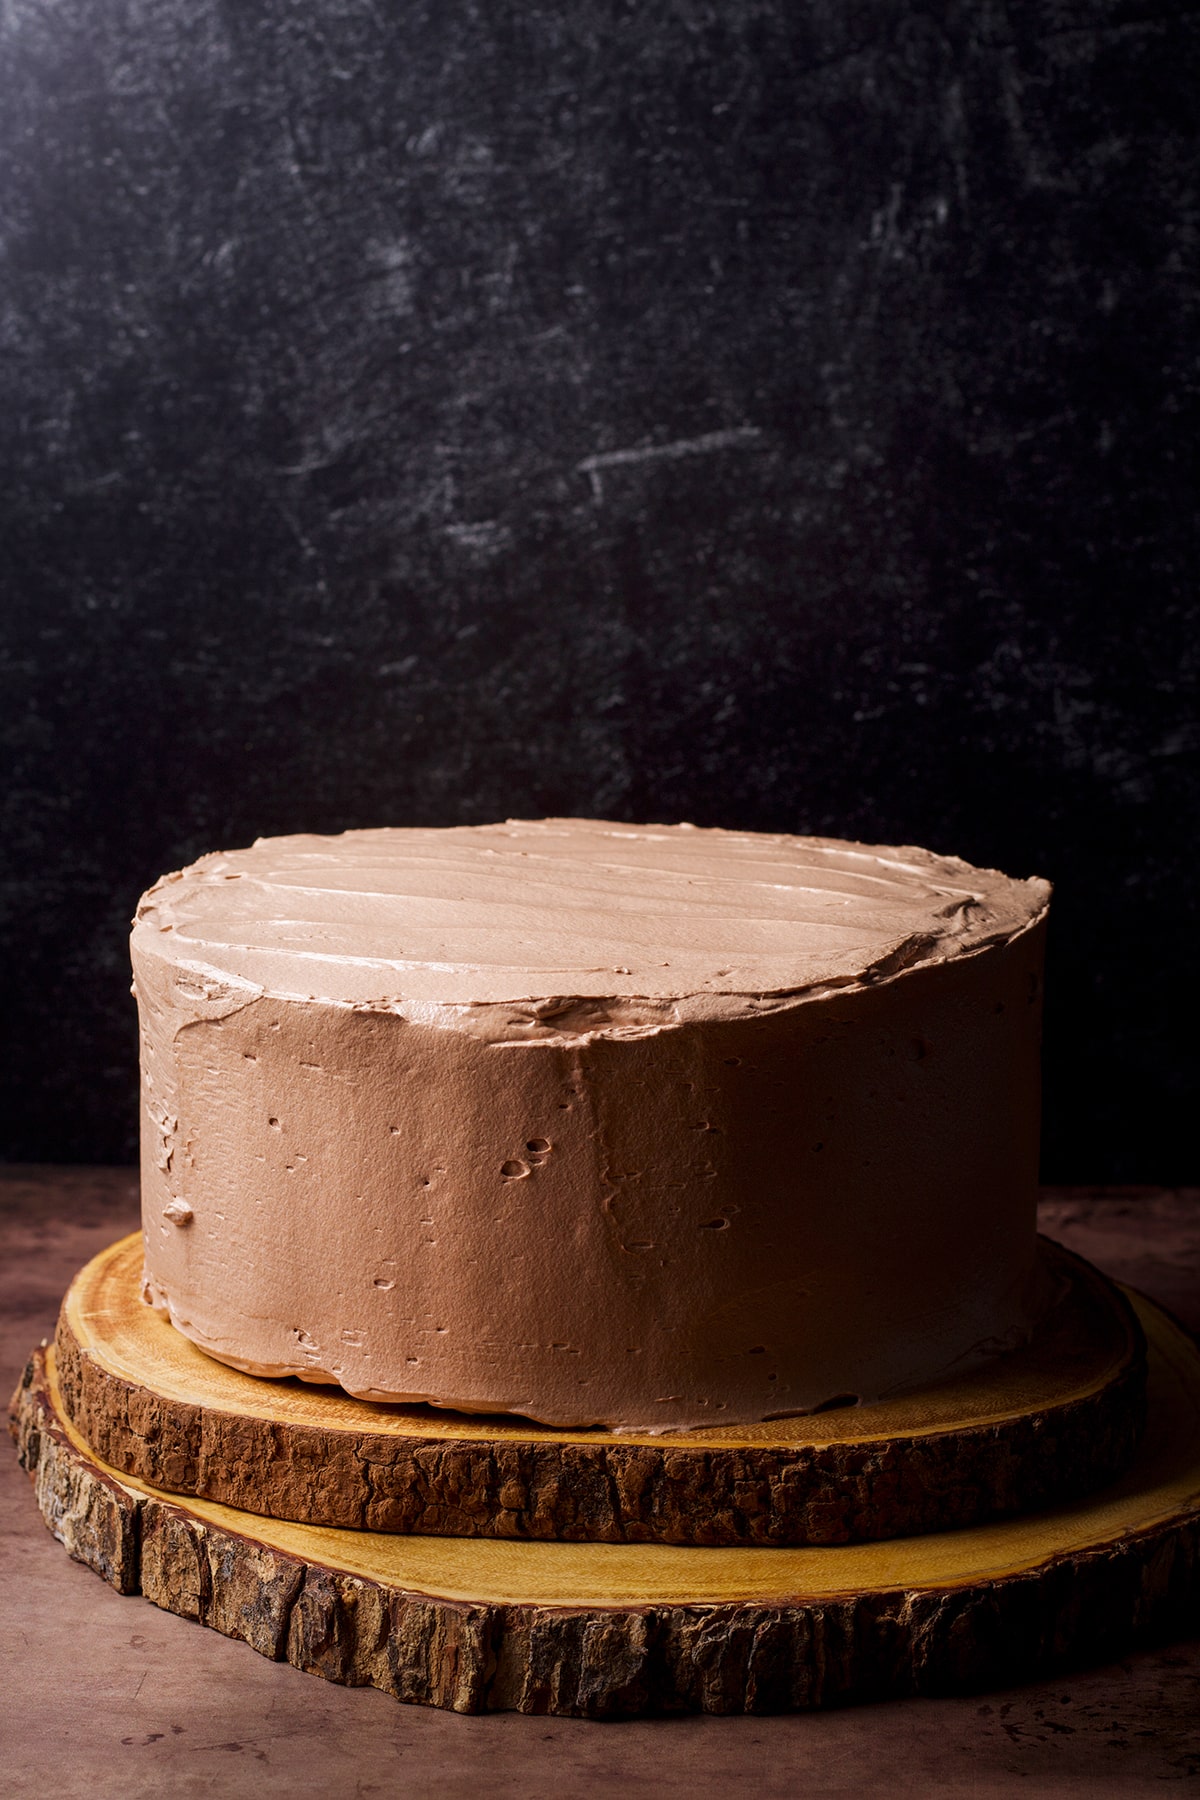 A 2-layer chocolate truffle cake that's been filled and frosted with milk chocolate buttercream.